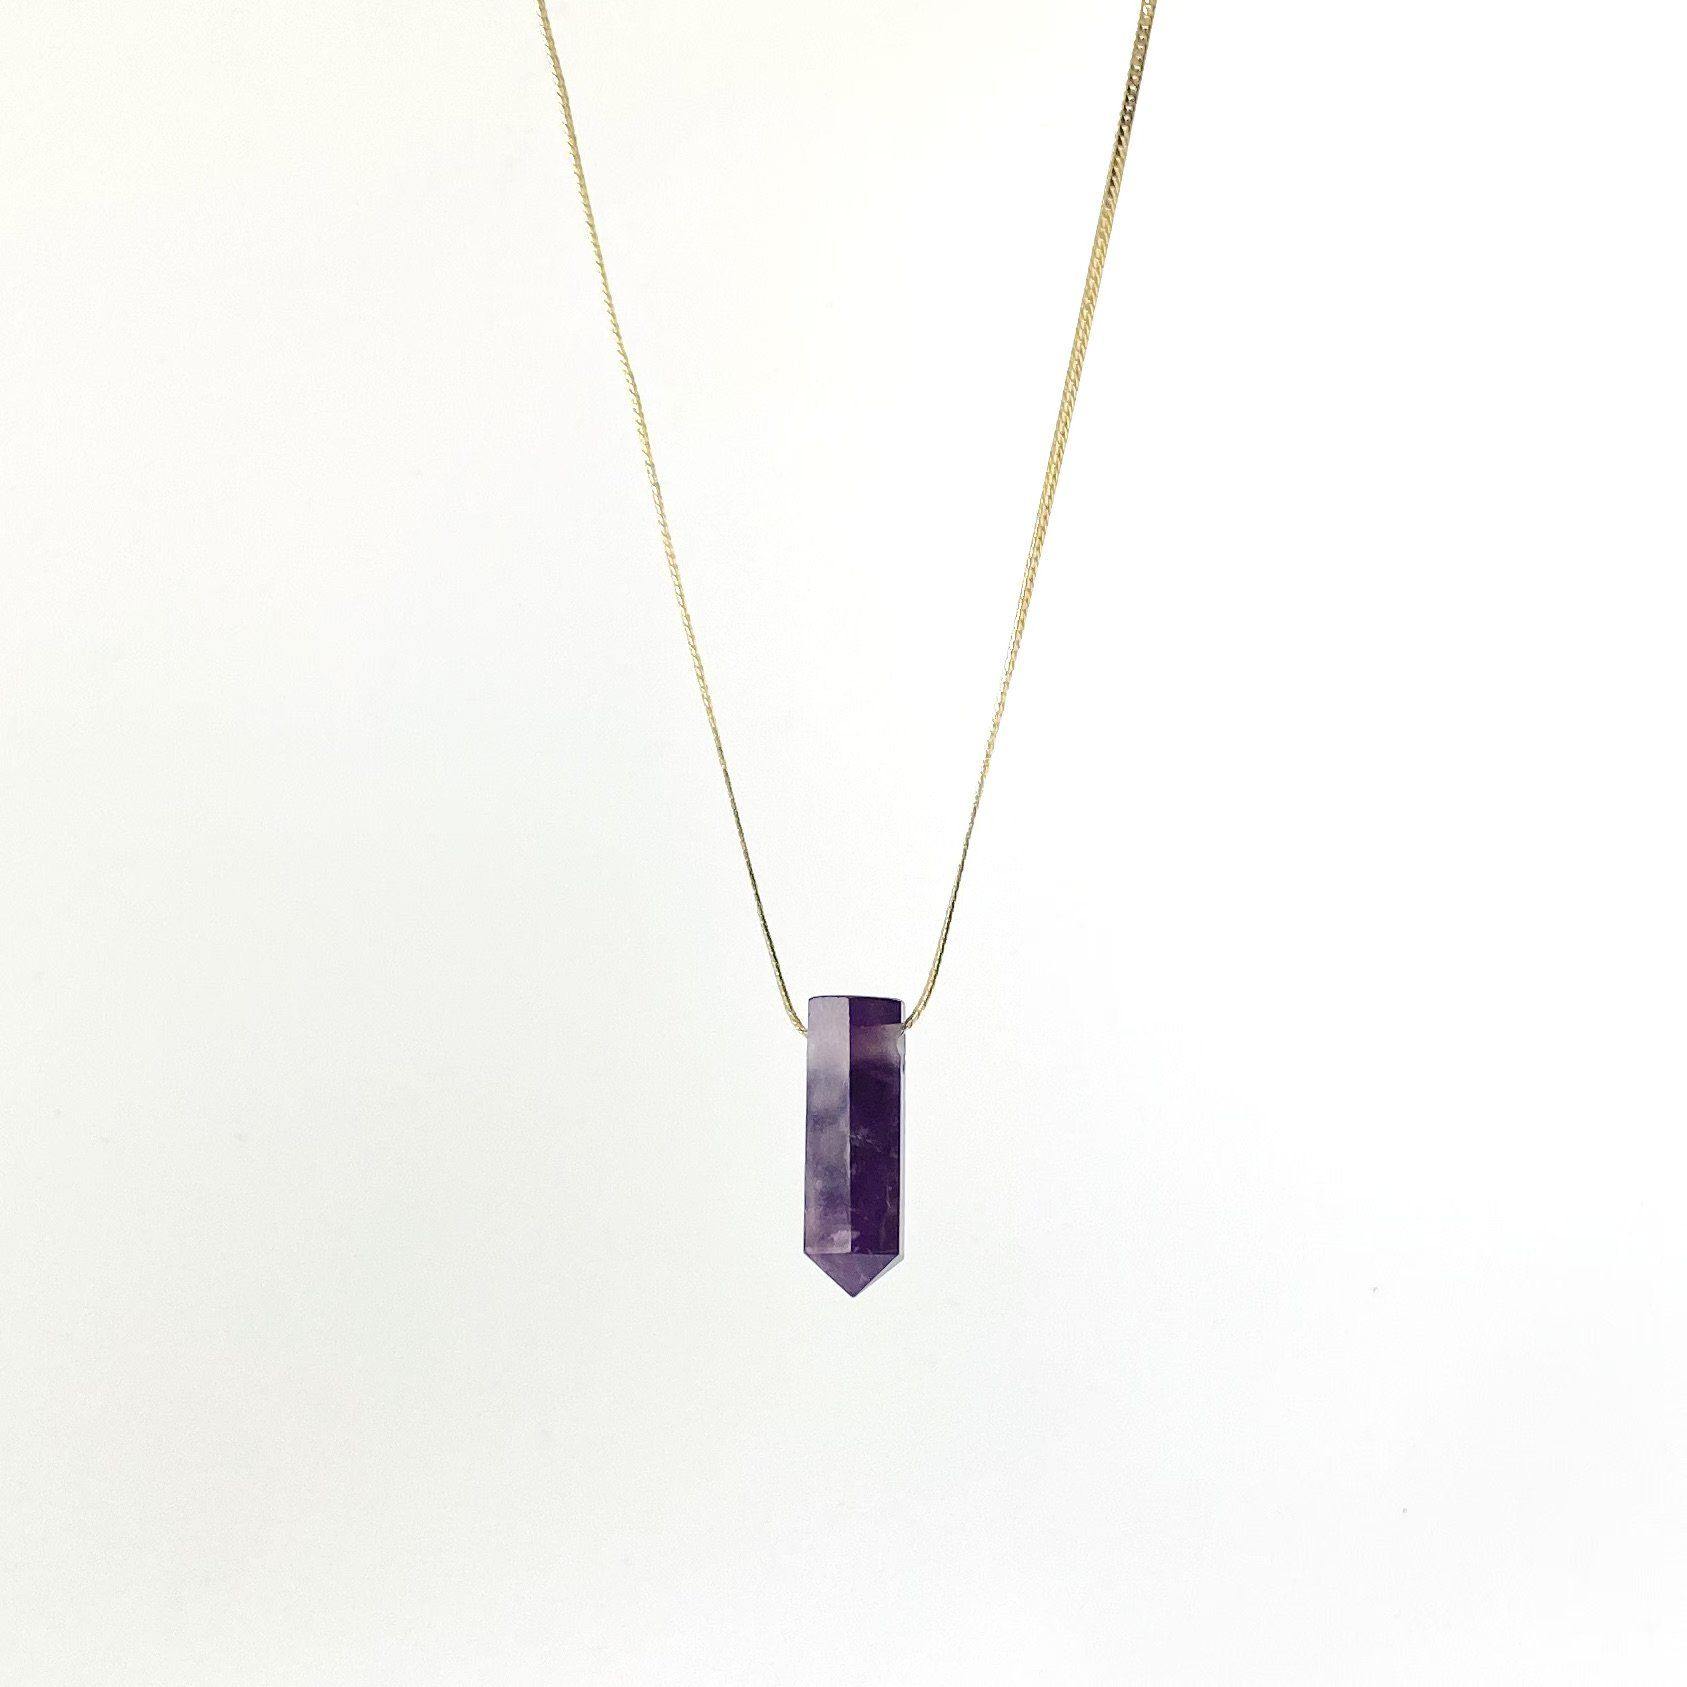 AMETHYST POINT GUARD NECKLACE - STONE COLD HAWK